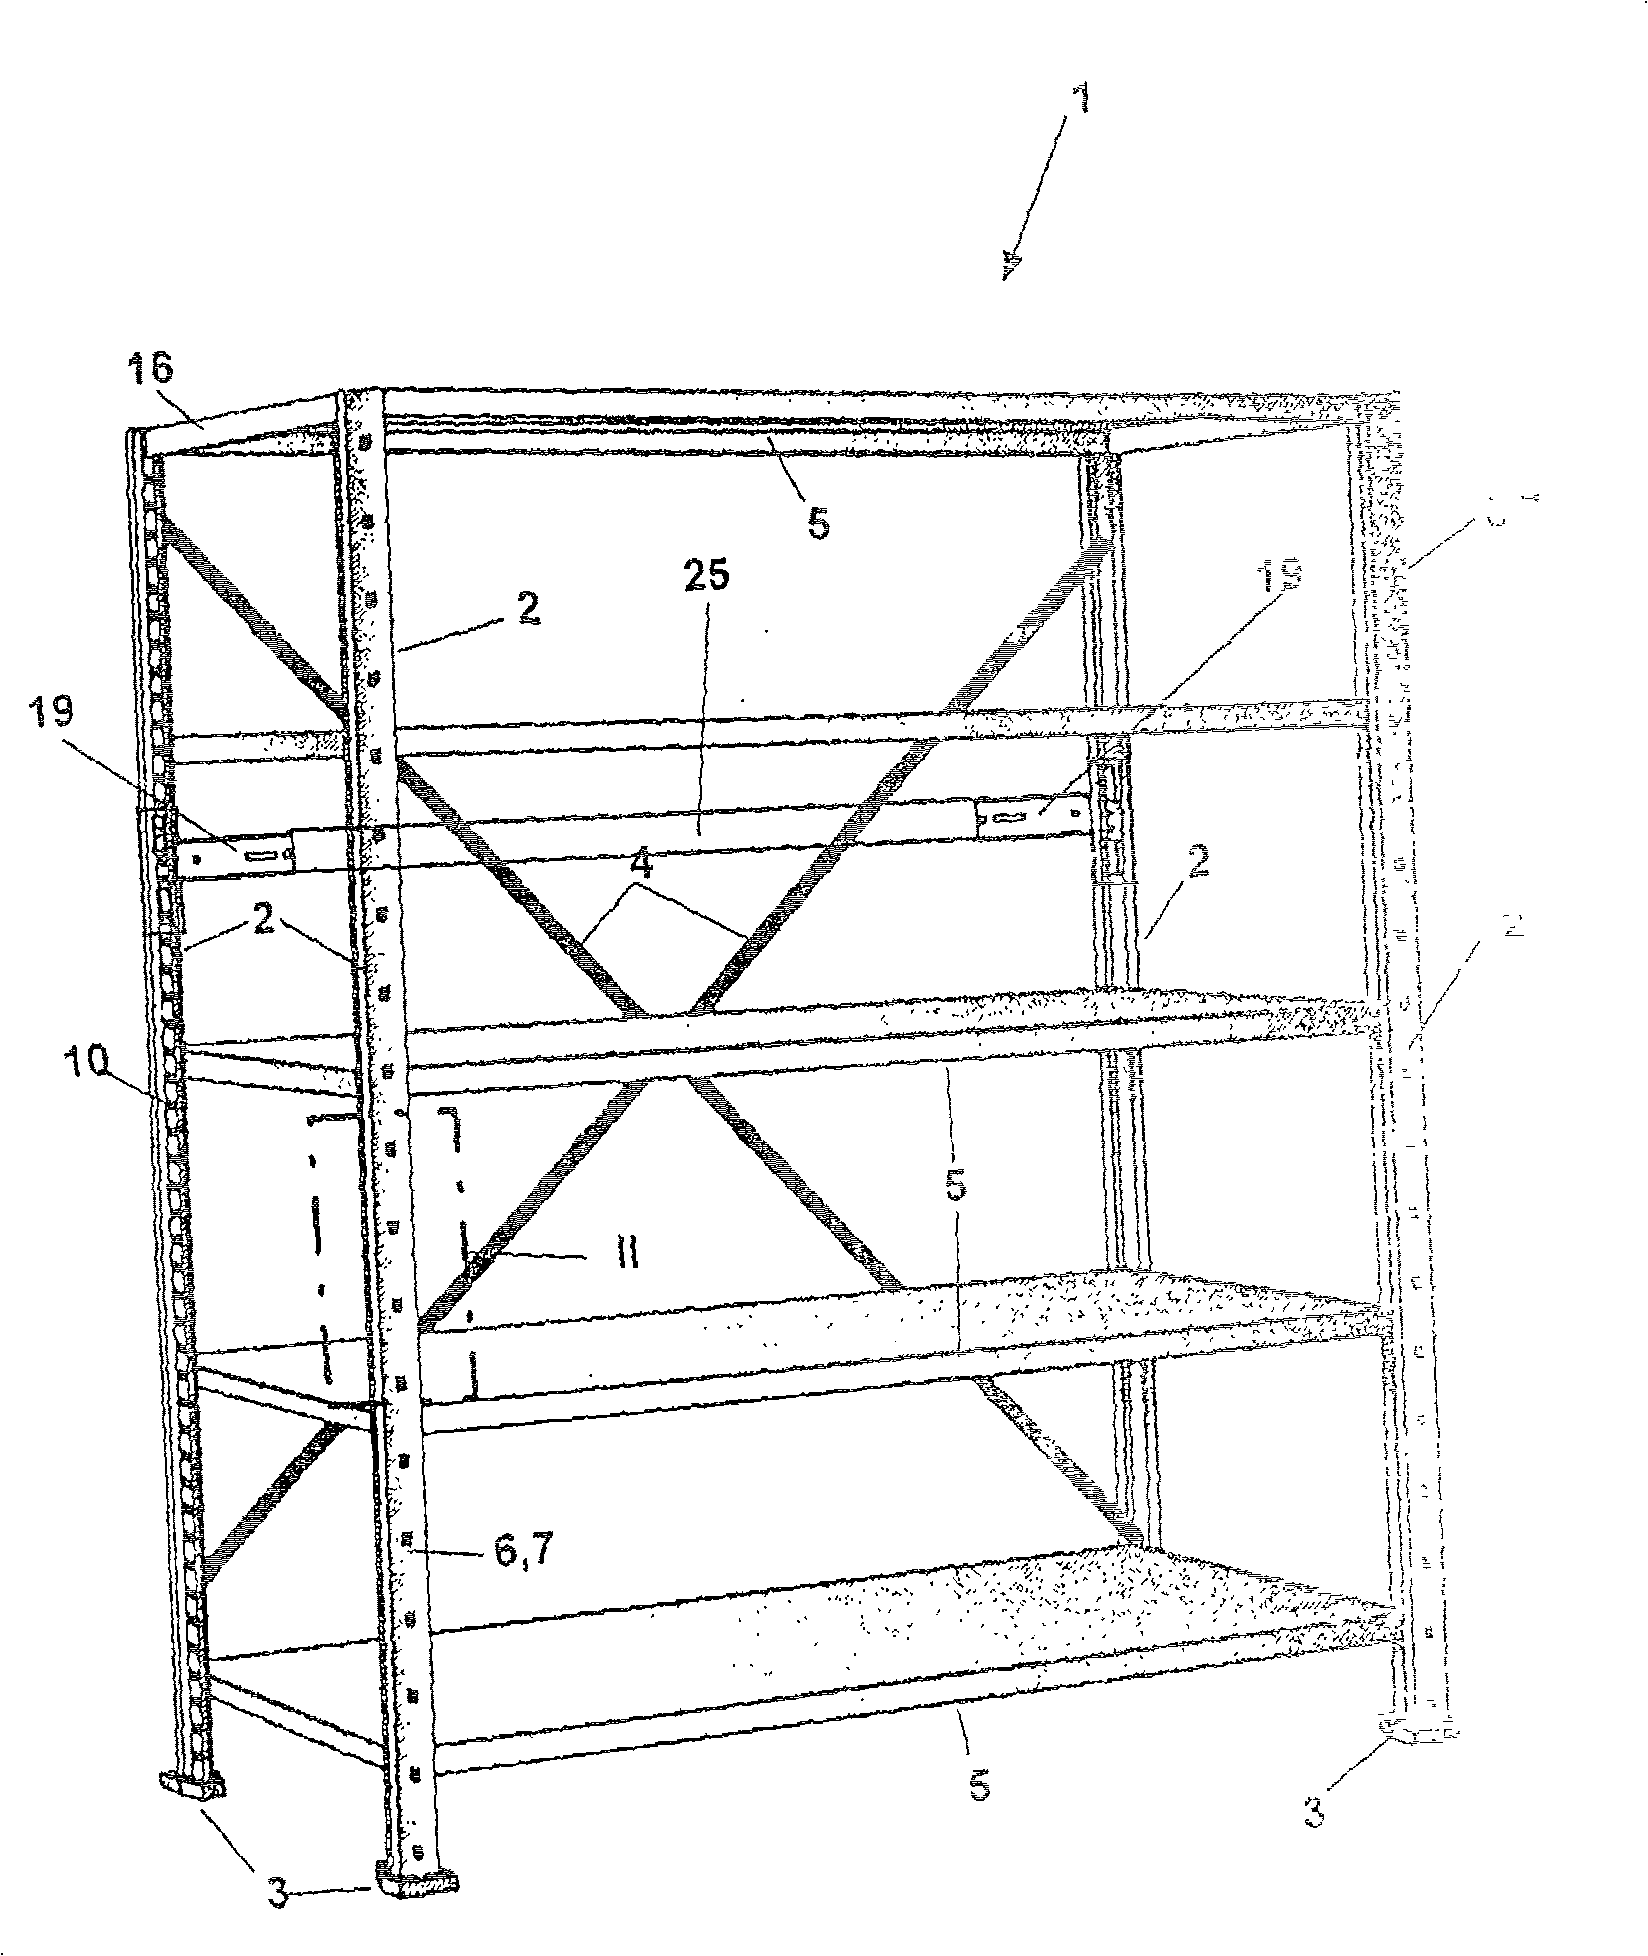 Shelf system for storing and archiving objects